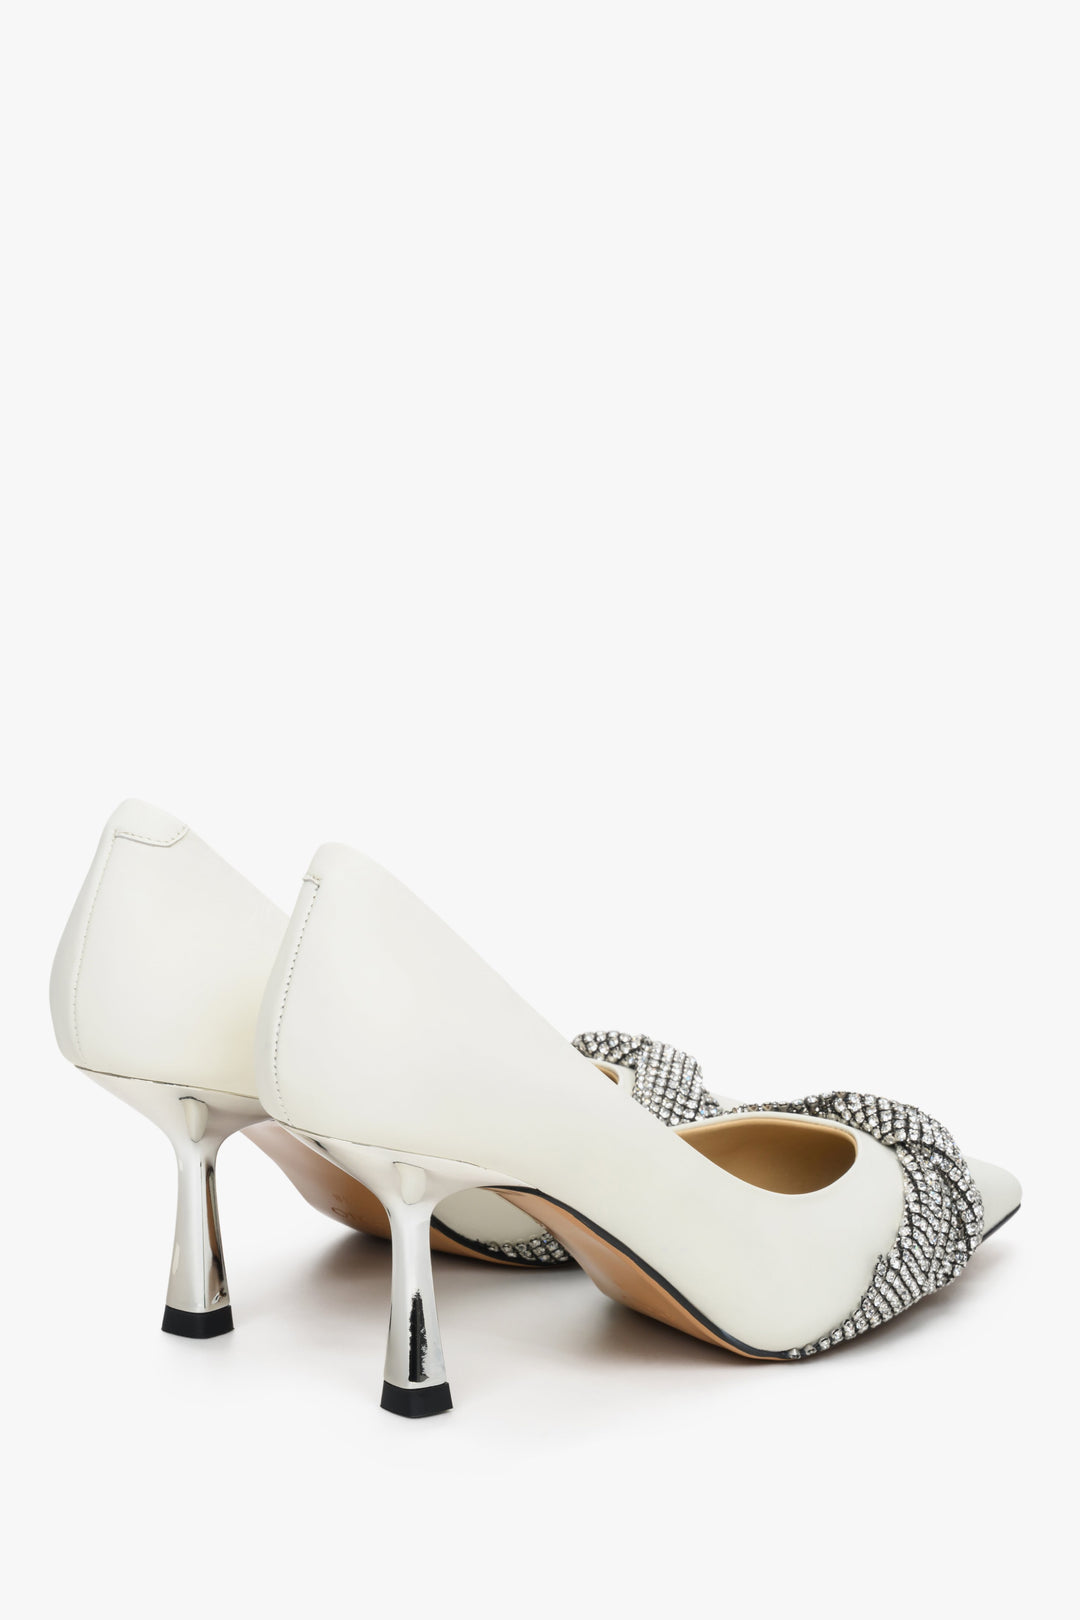 Women's white high heels made of genuine leather for fall.